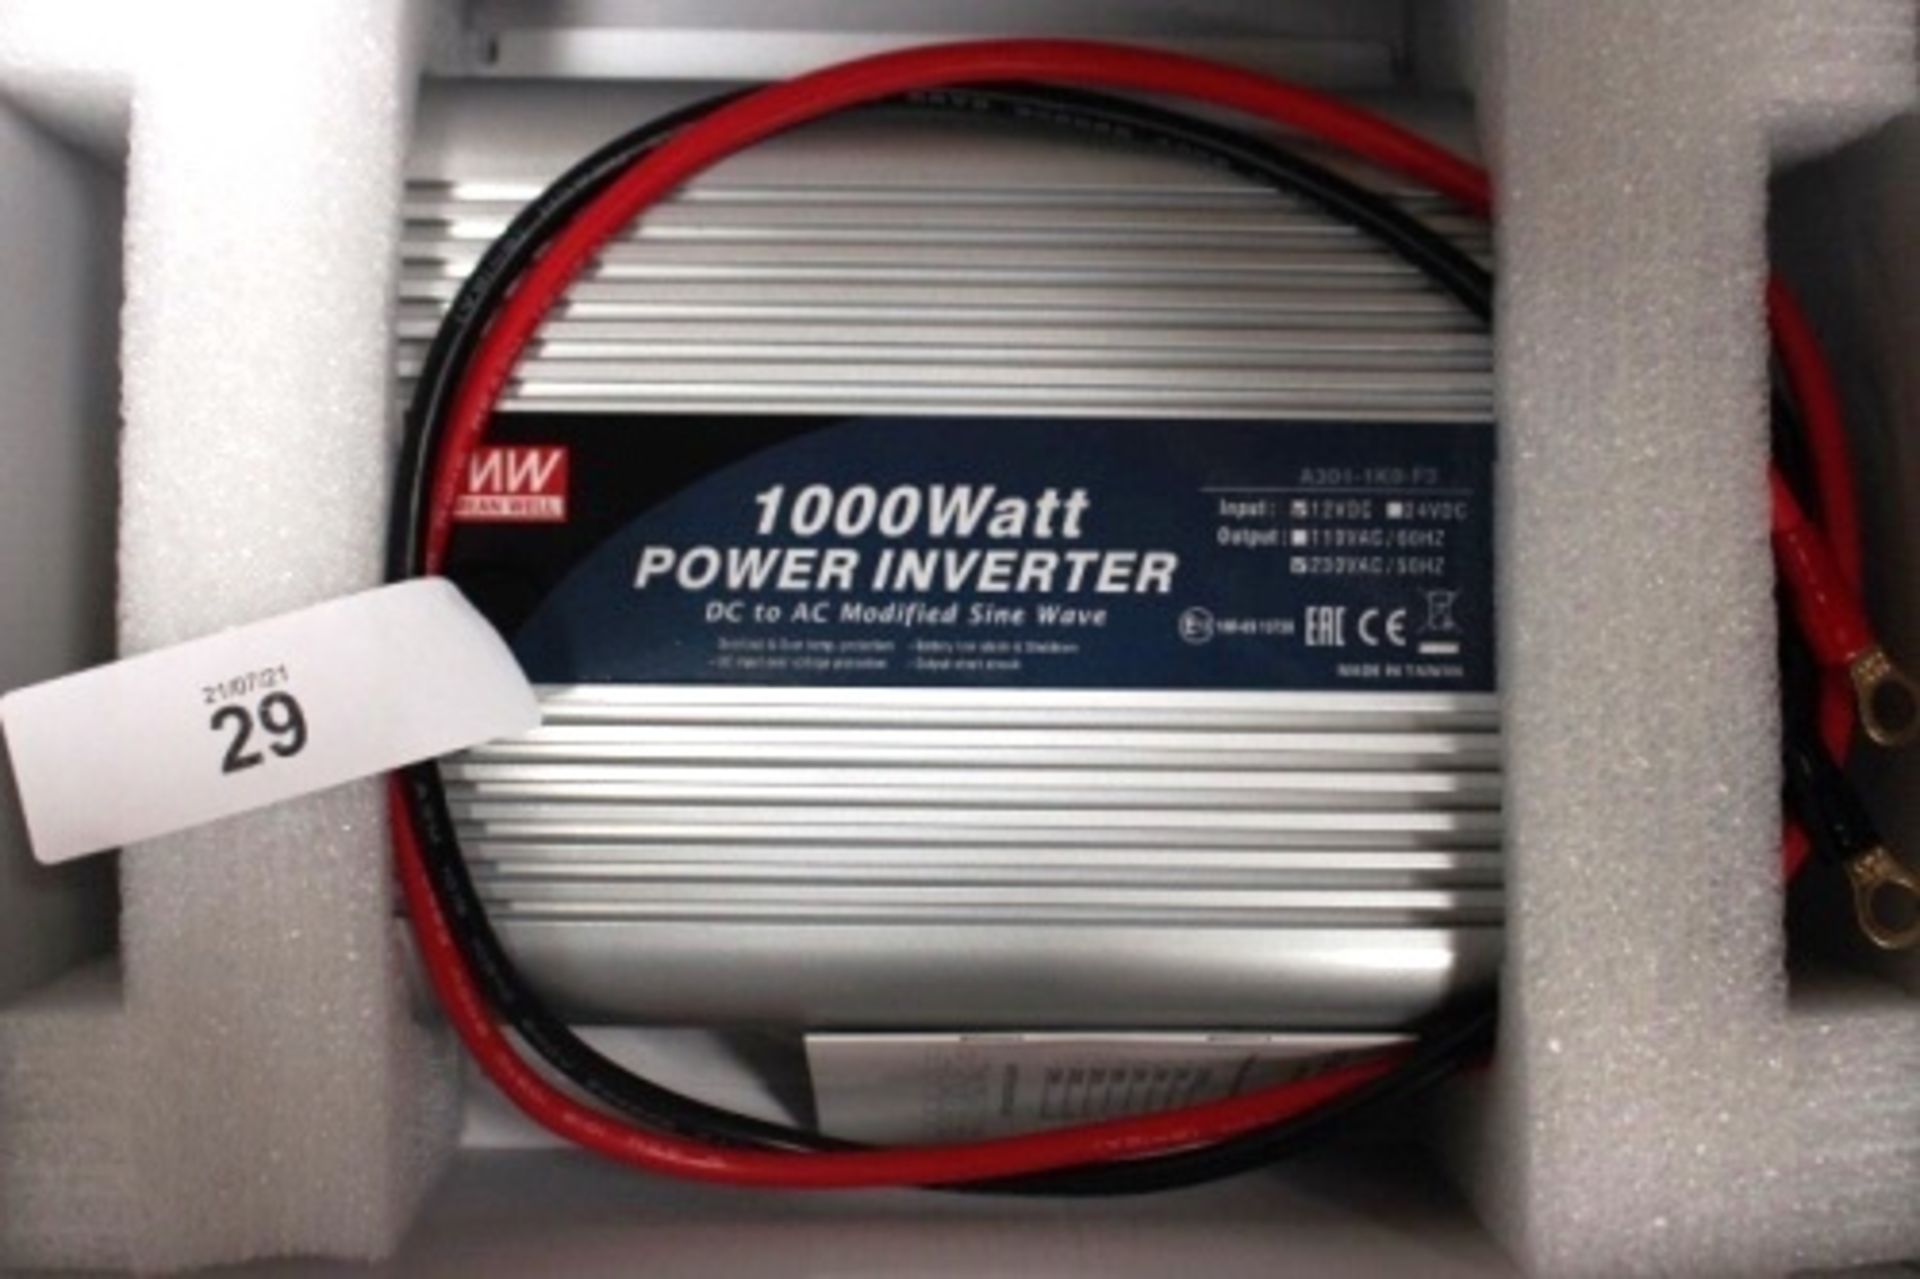 1 x Mean Well 1000W DC/AC power inverter, model 10R-0513728, 230VAC - New in box (ES5end) - Image 2 of 2